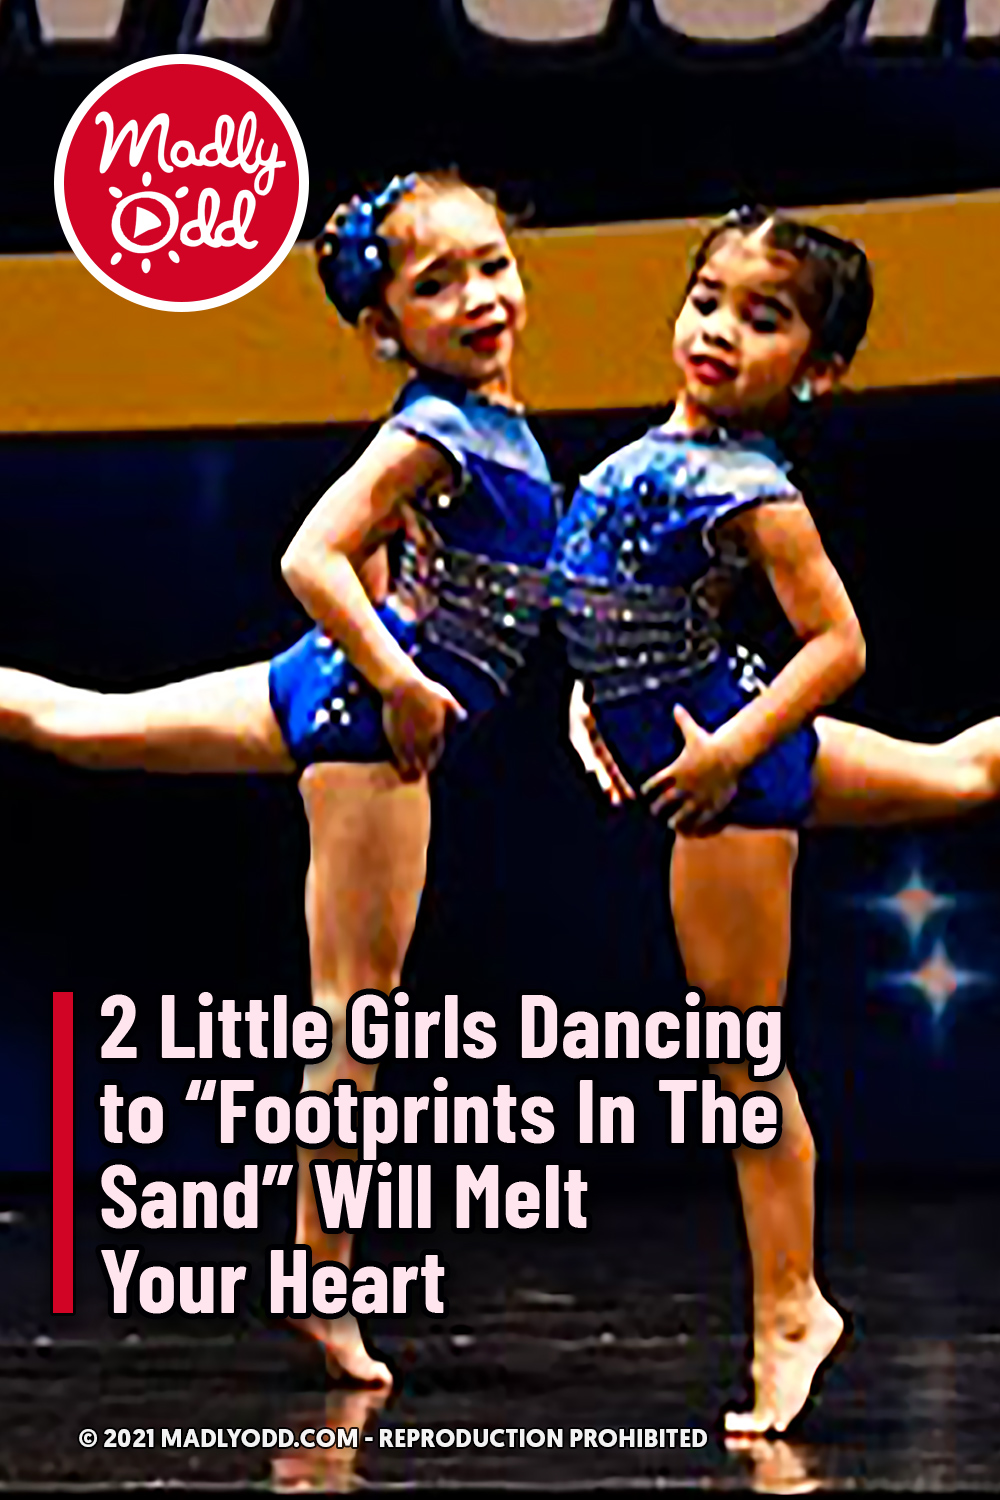 2 Little Girls Dancing to “Footprints In The Sand” Will Melt Your Heart